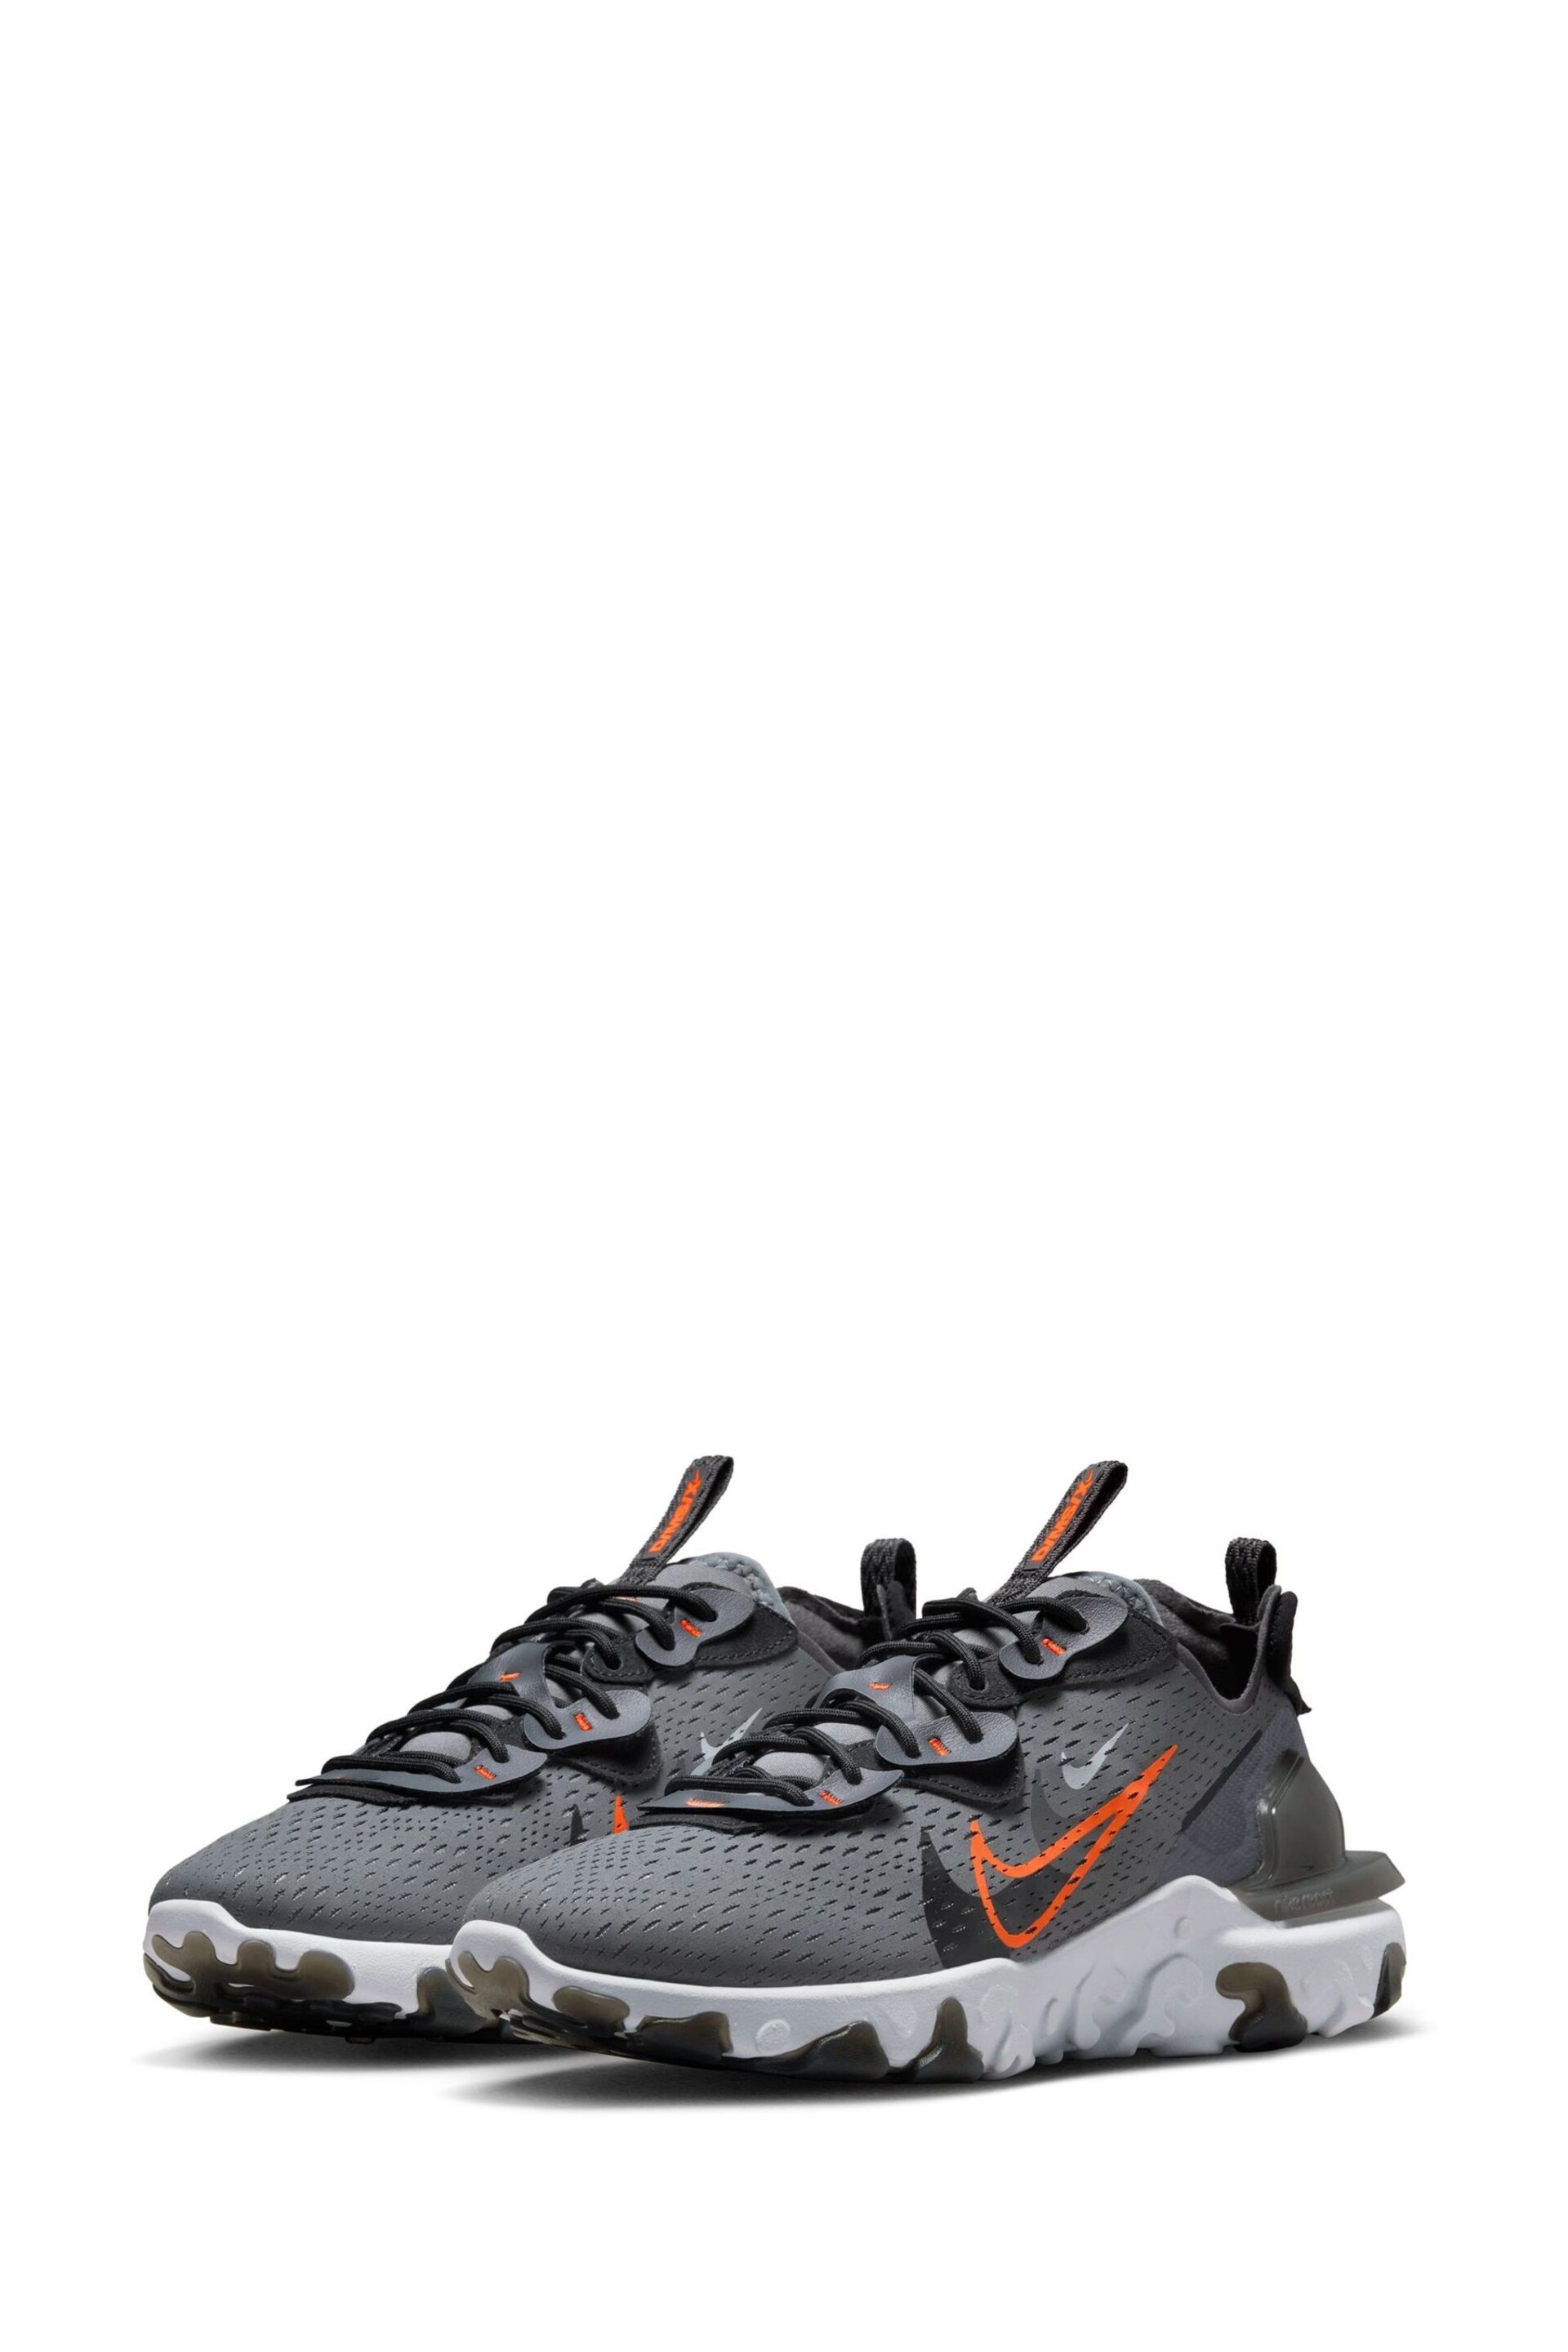 Nike Grey React Vision Trainers - Image 5 of 10